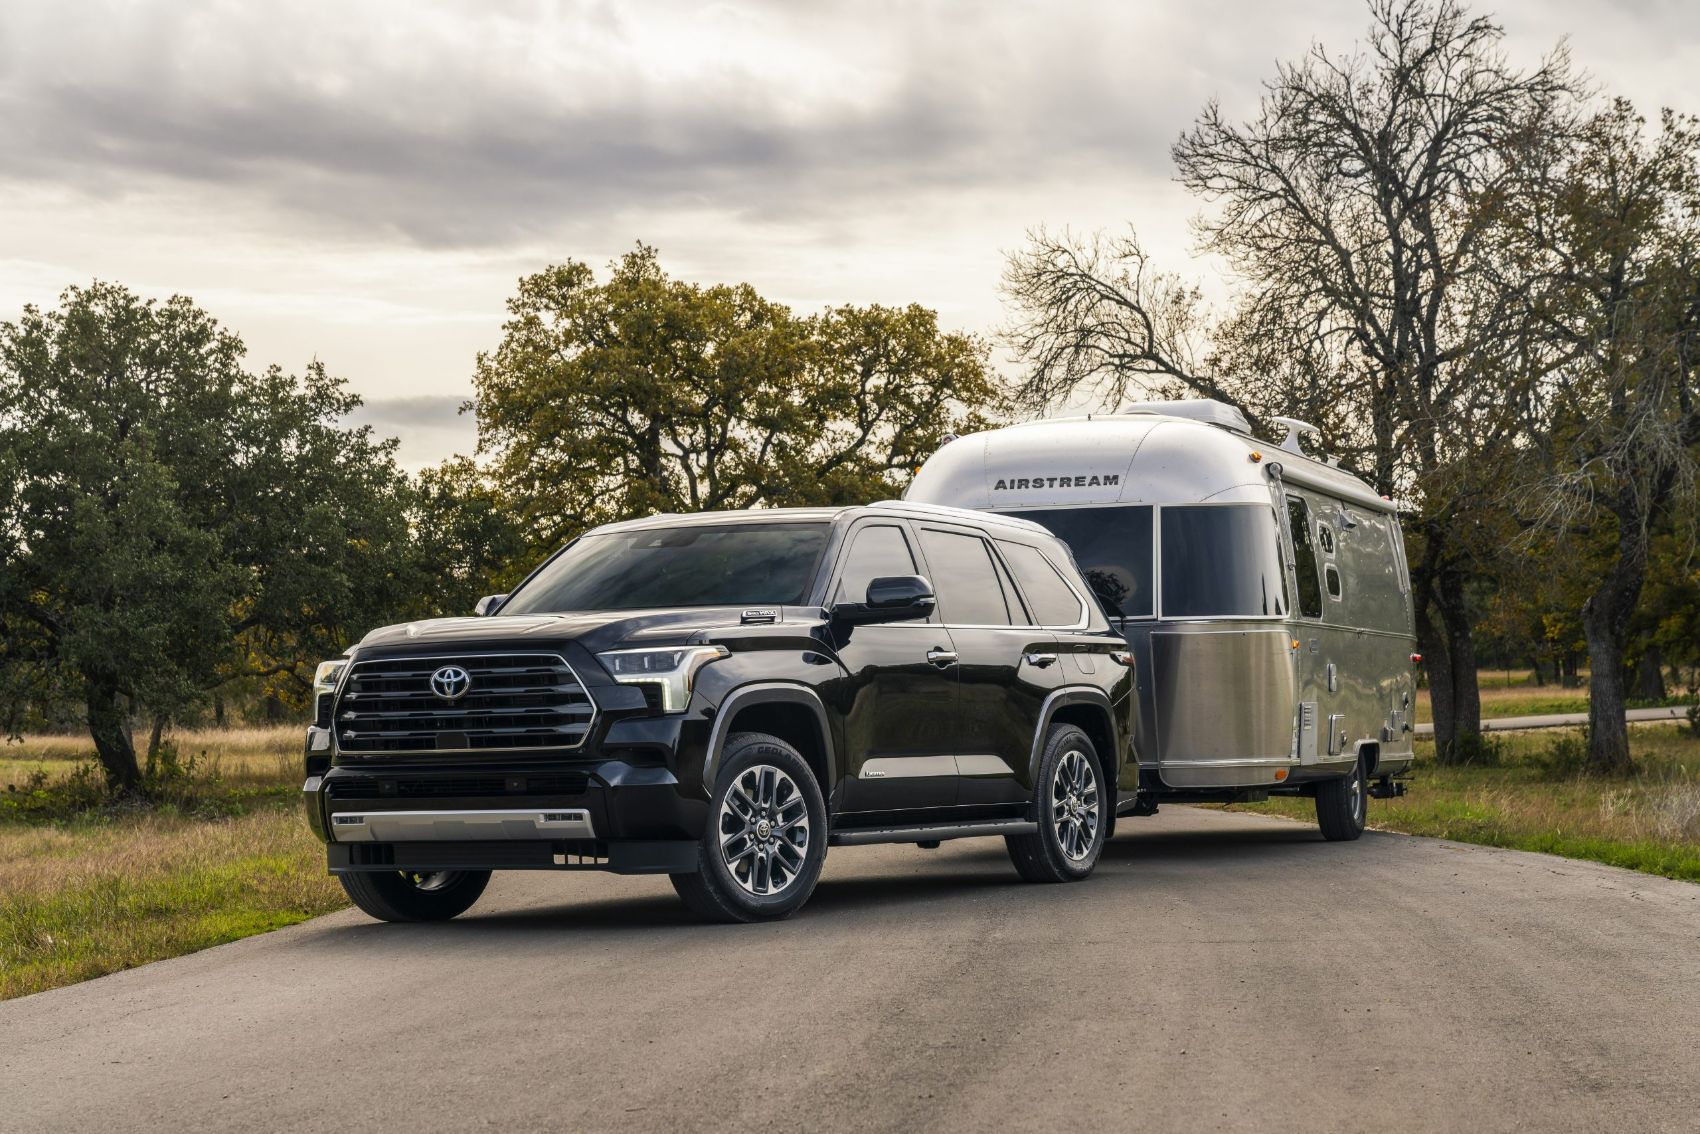 2023 Toyota Sequoia: Trim Levels, New Tech & Safety Features, Powertrain Specs, Pricing & More